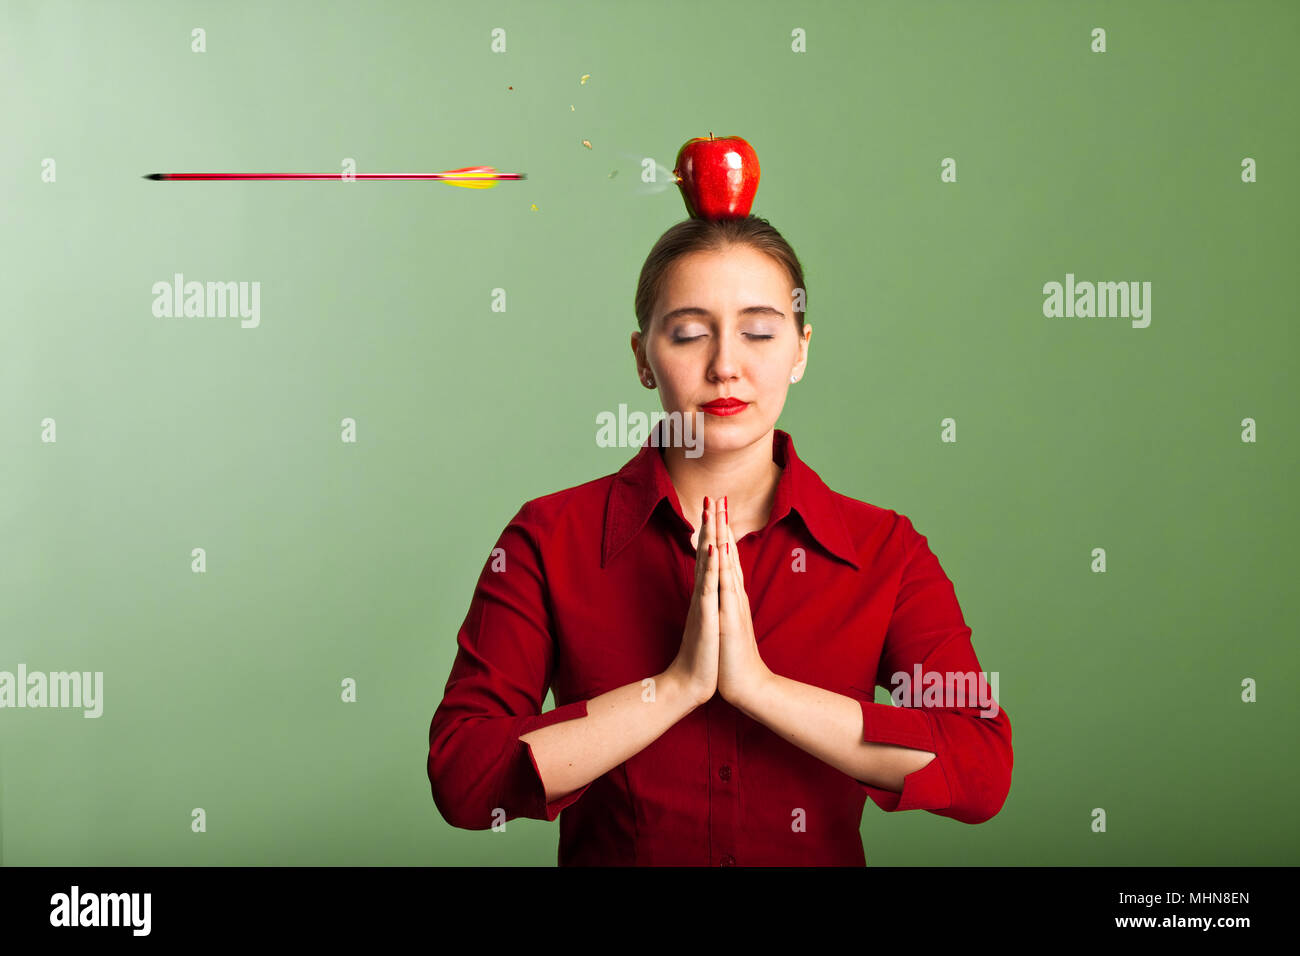 Woman meditating with an apple on her head, shot through by an arrow Stock Photo